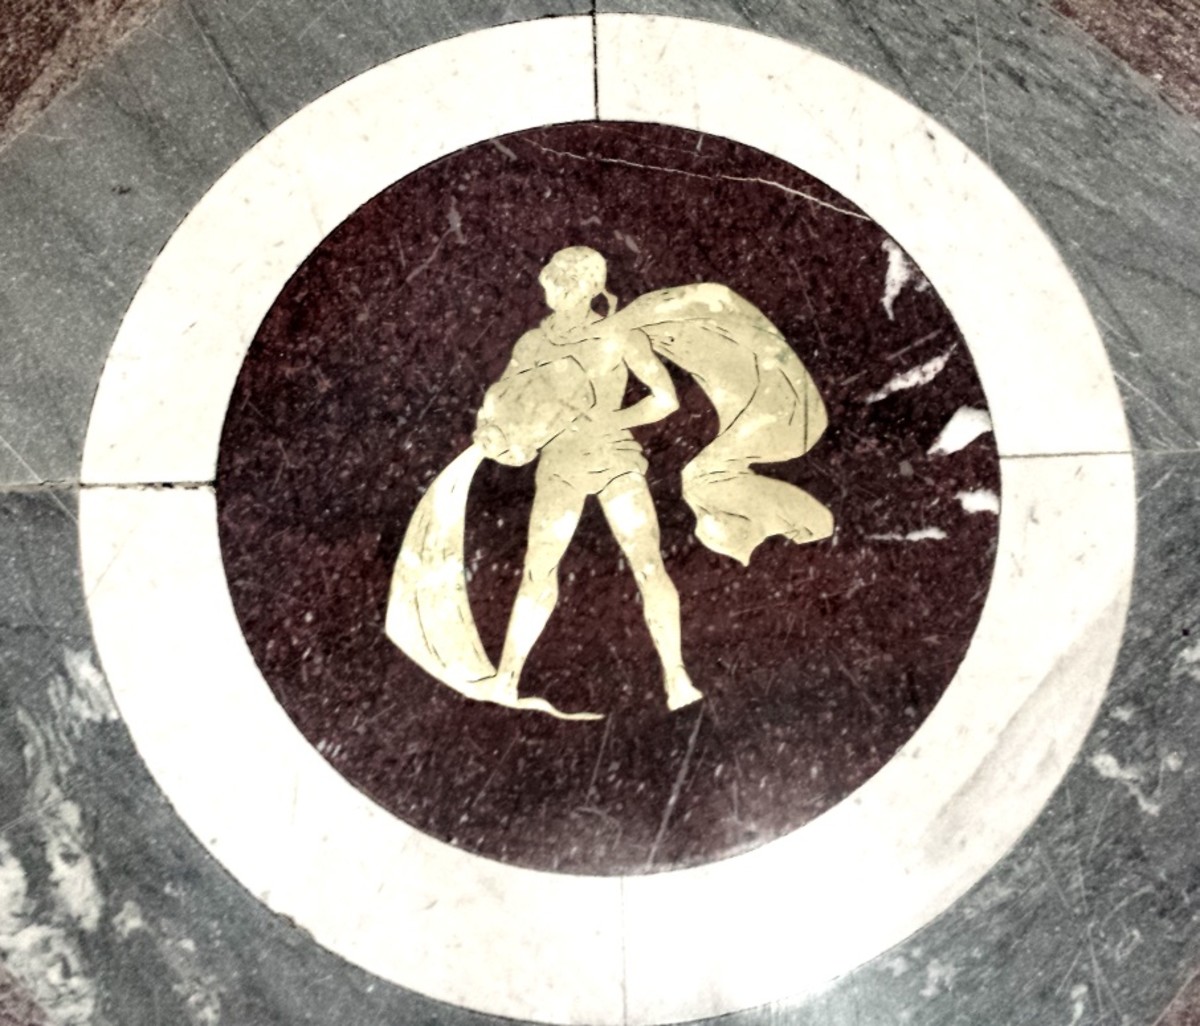 Aquarius, pouring out knowledge for all humanity. All 12 signs of the zodiac are inlaid, in brass, in the marble floor of the Library of Congress, Washington, D.C.